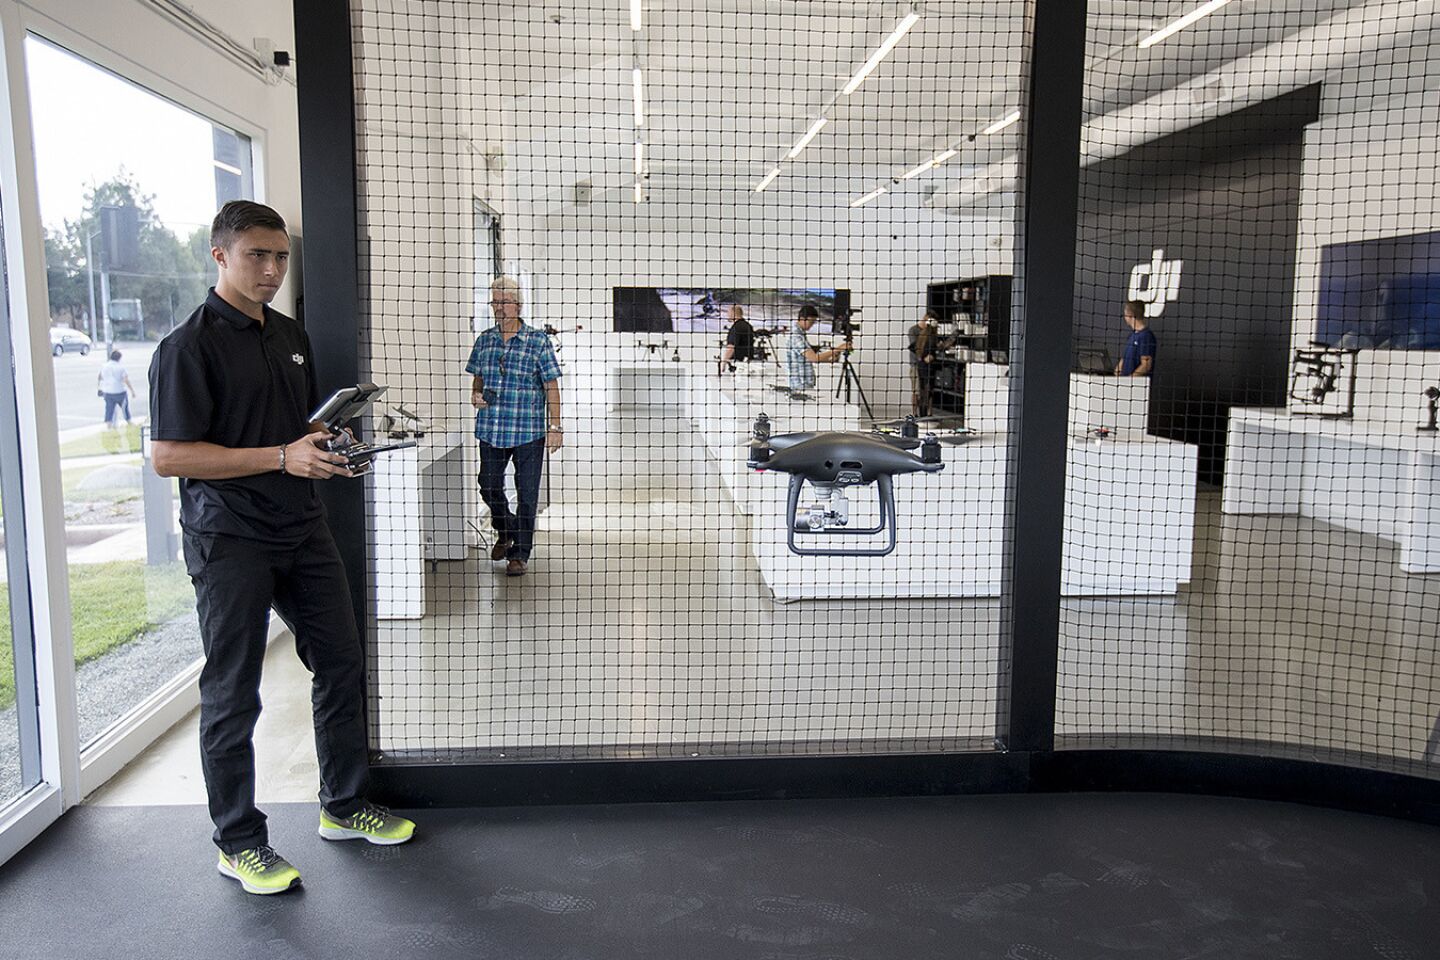 DJI drone store is ready launch in Costa Mesa - Los Angeles Times